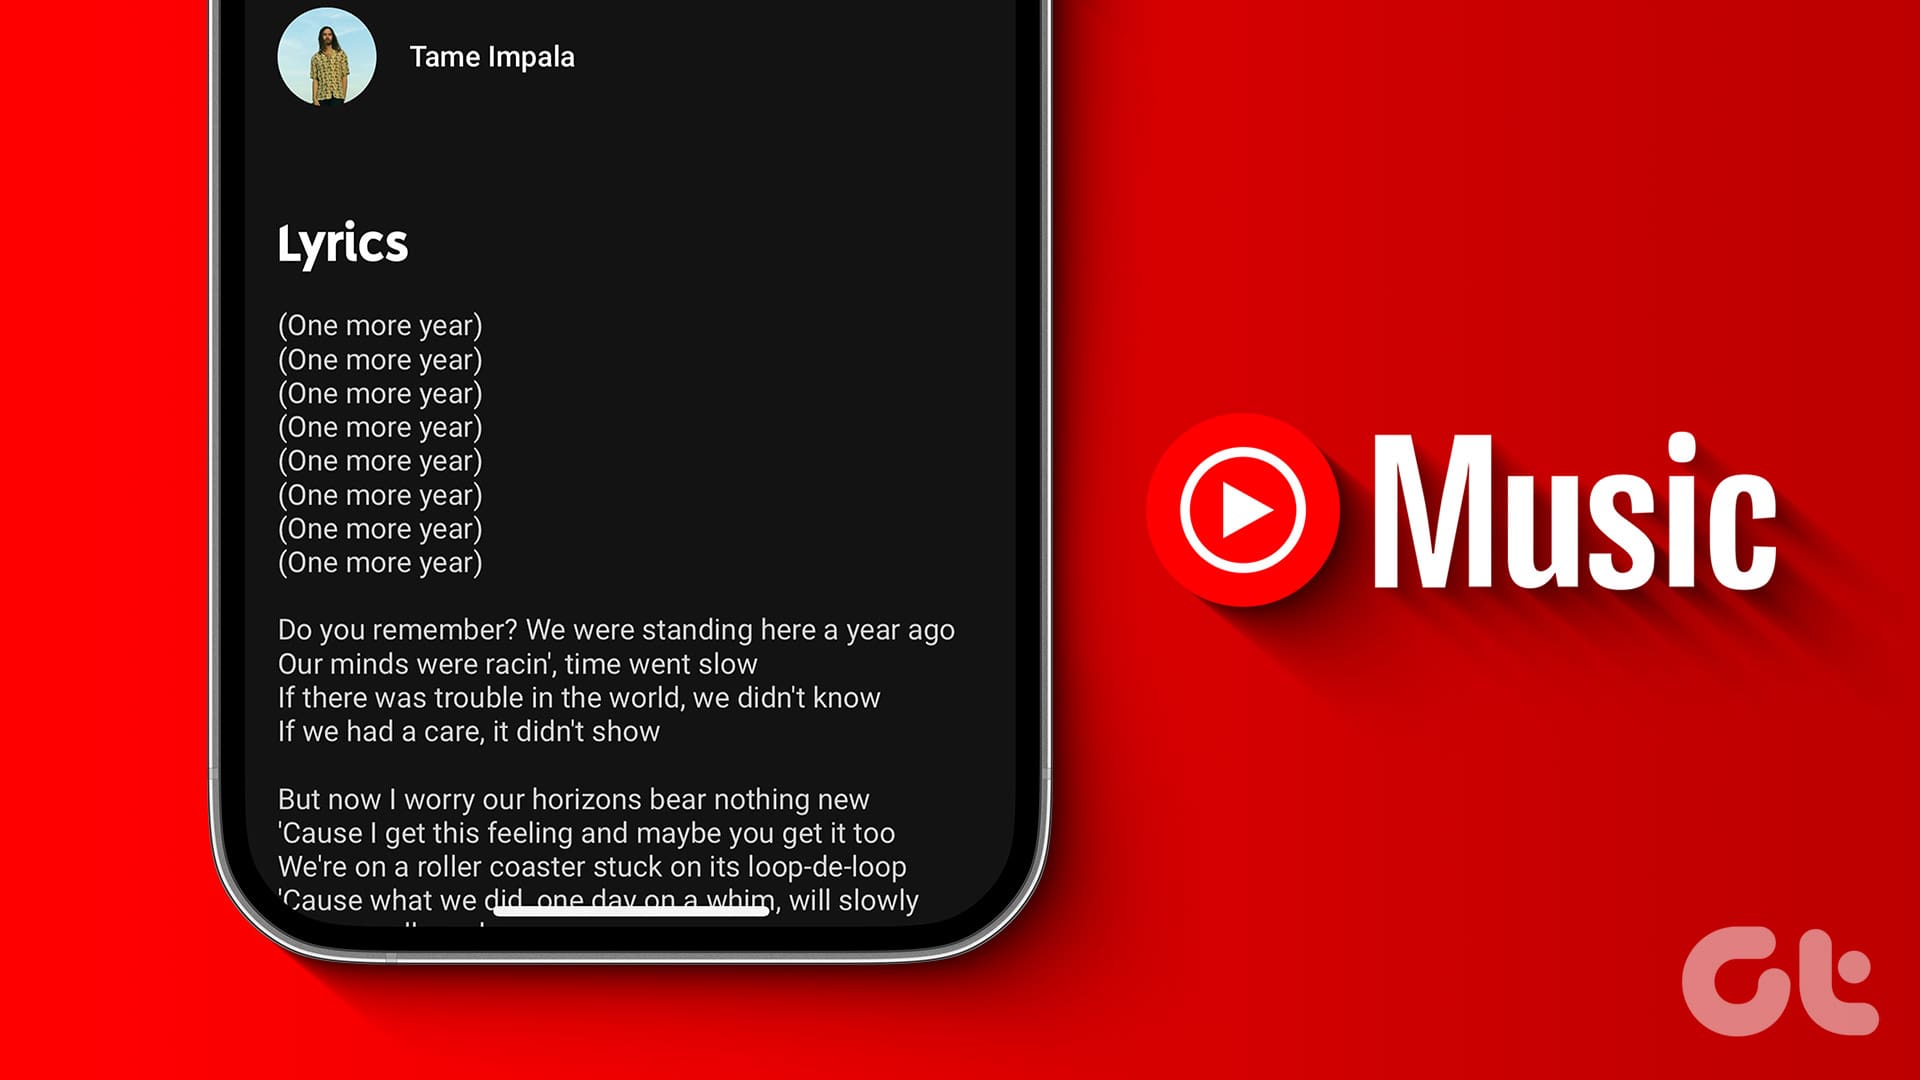 How_to_Enable_Song_Lyrics_on_YouTube_Music_on_Mobile_and_Desktop